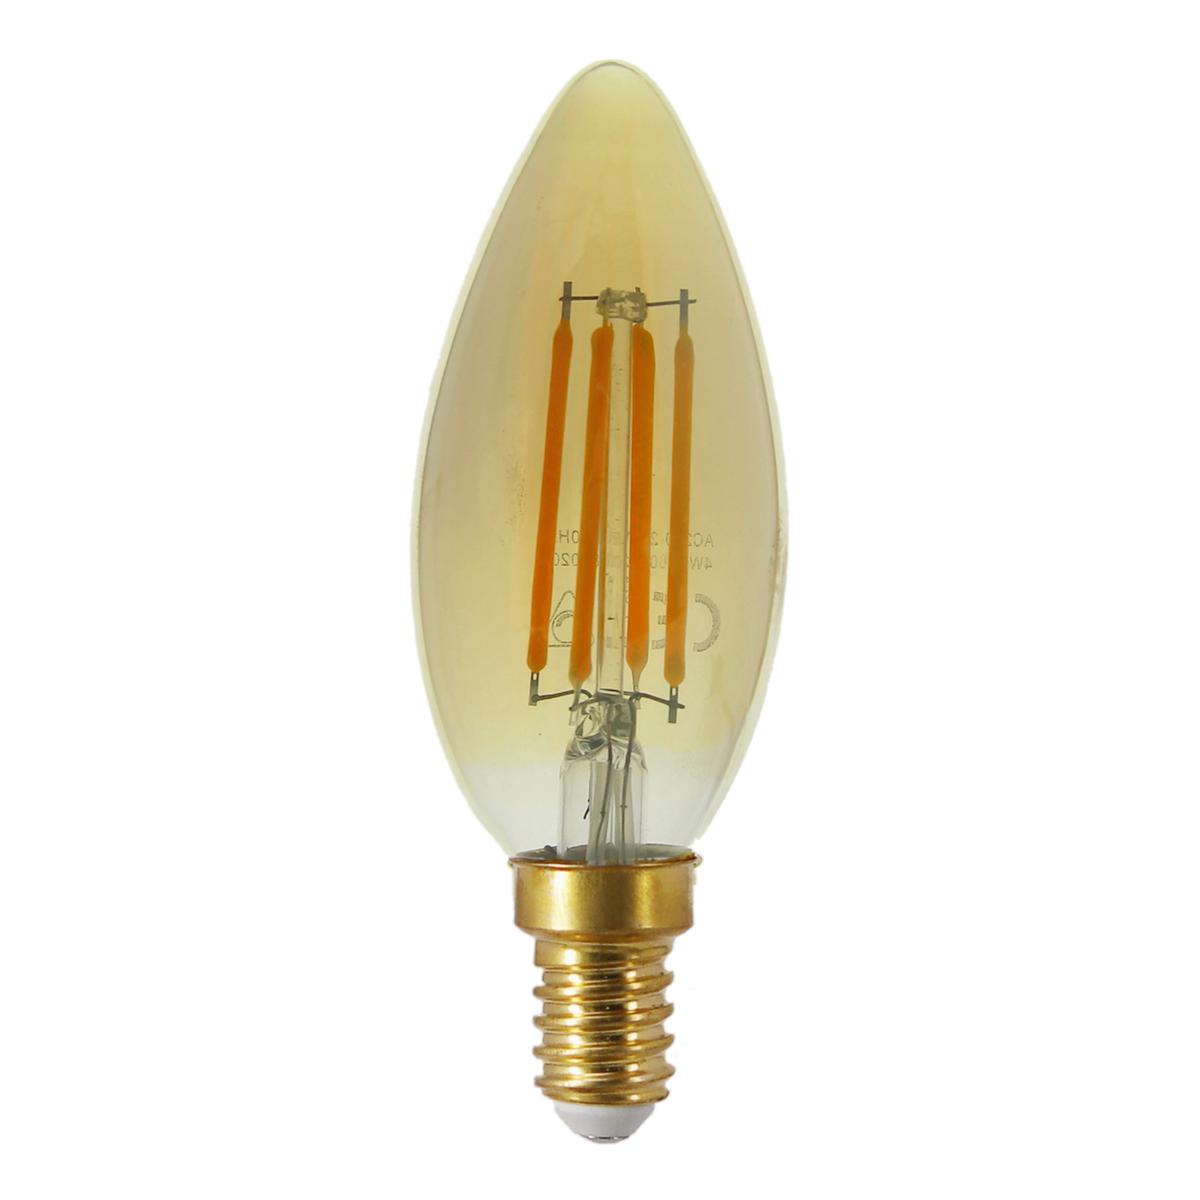 Ampoule LED E14 Filament Dimmable 4W C35 Bougie - Silamp France